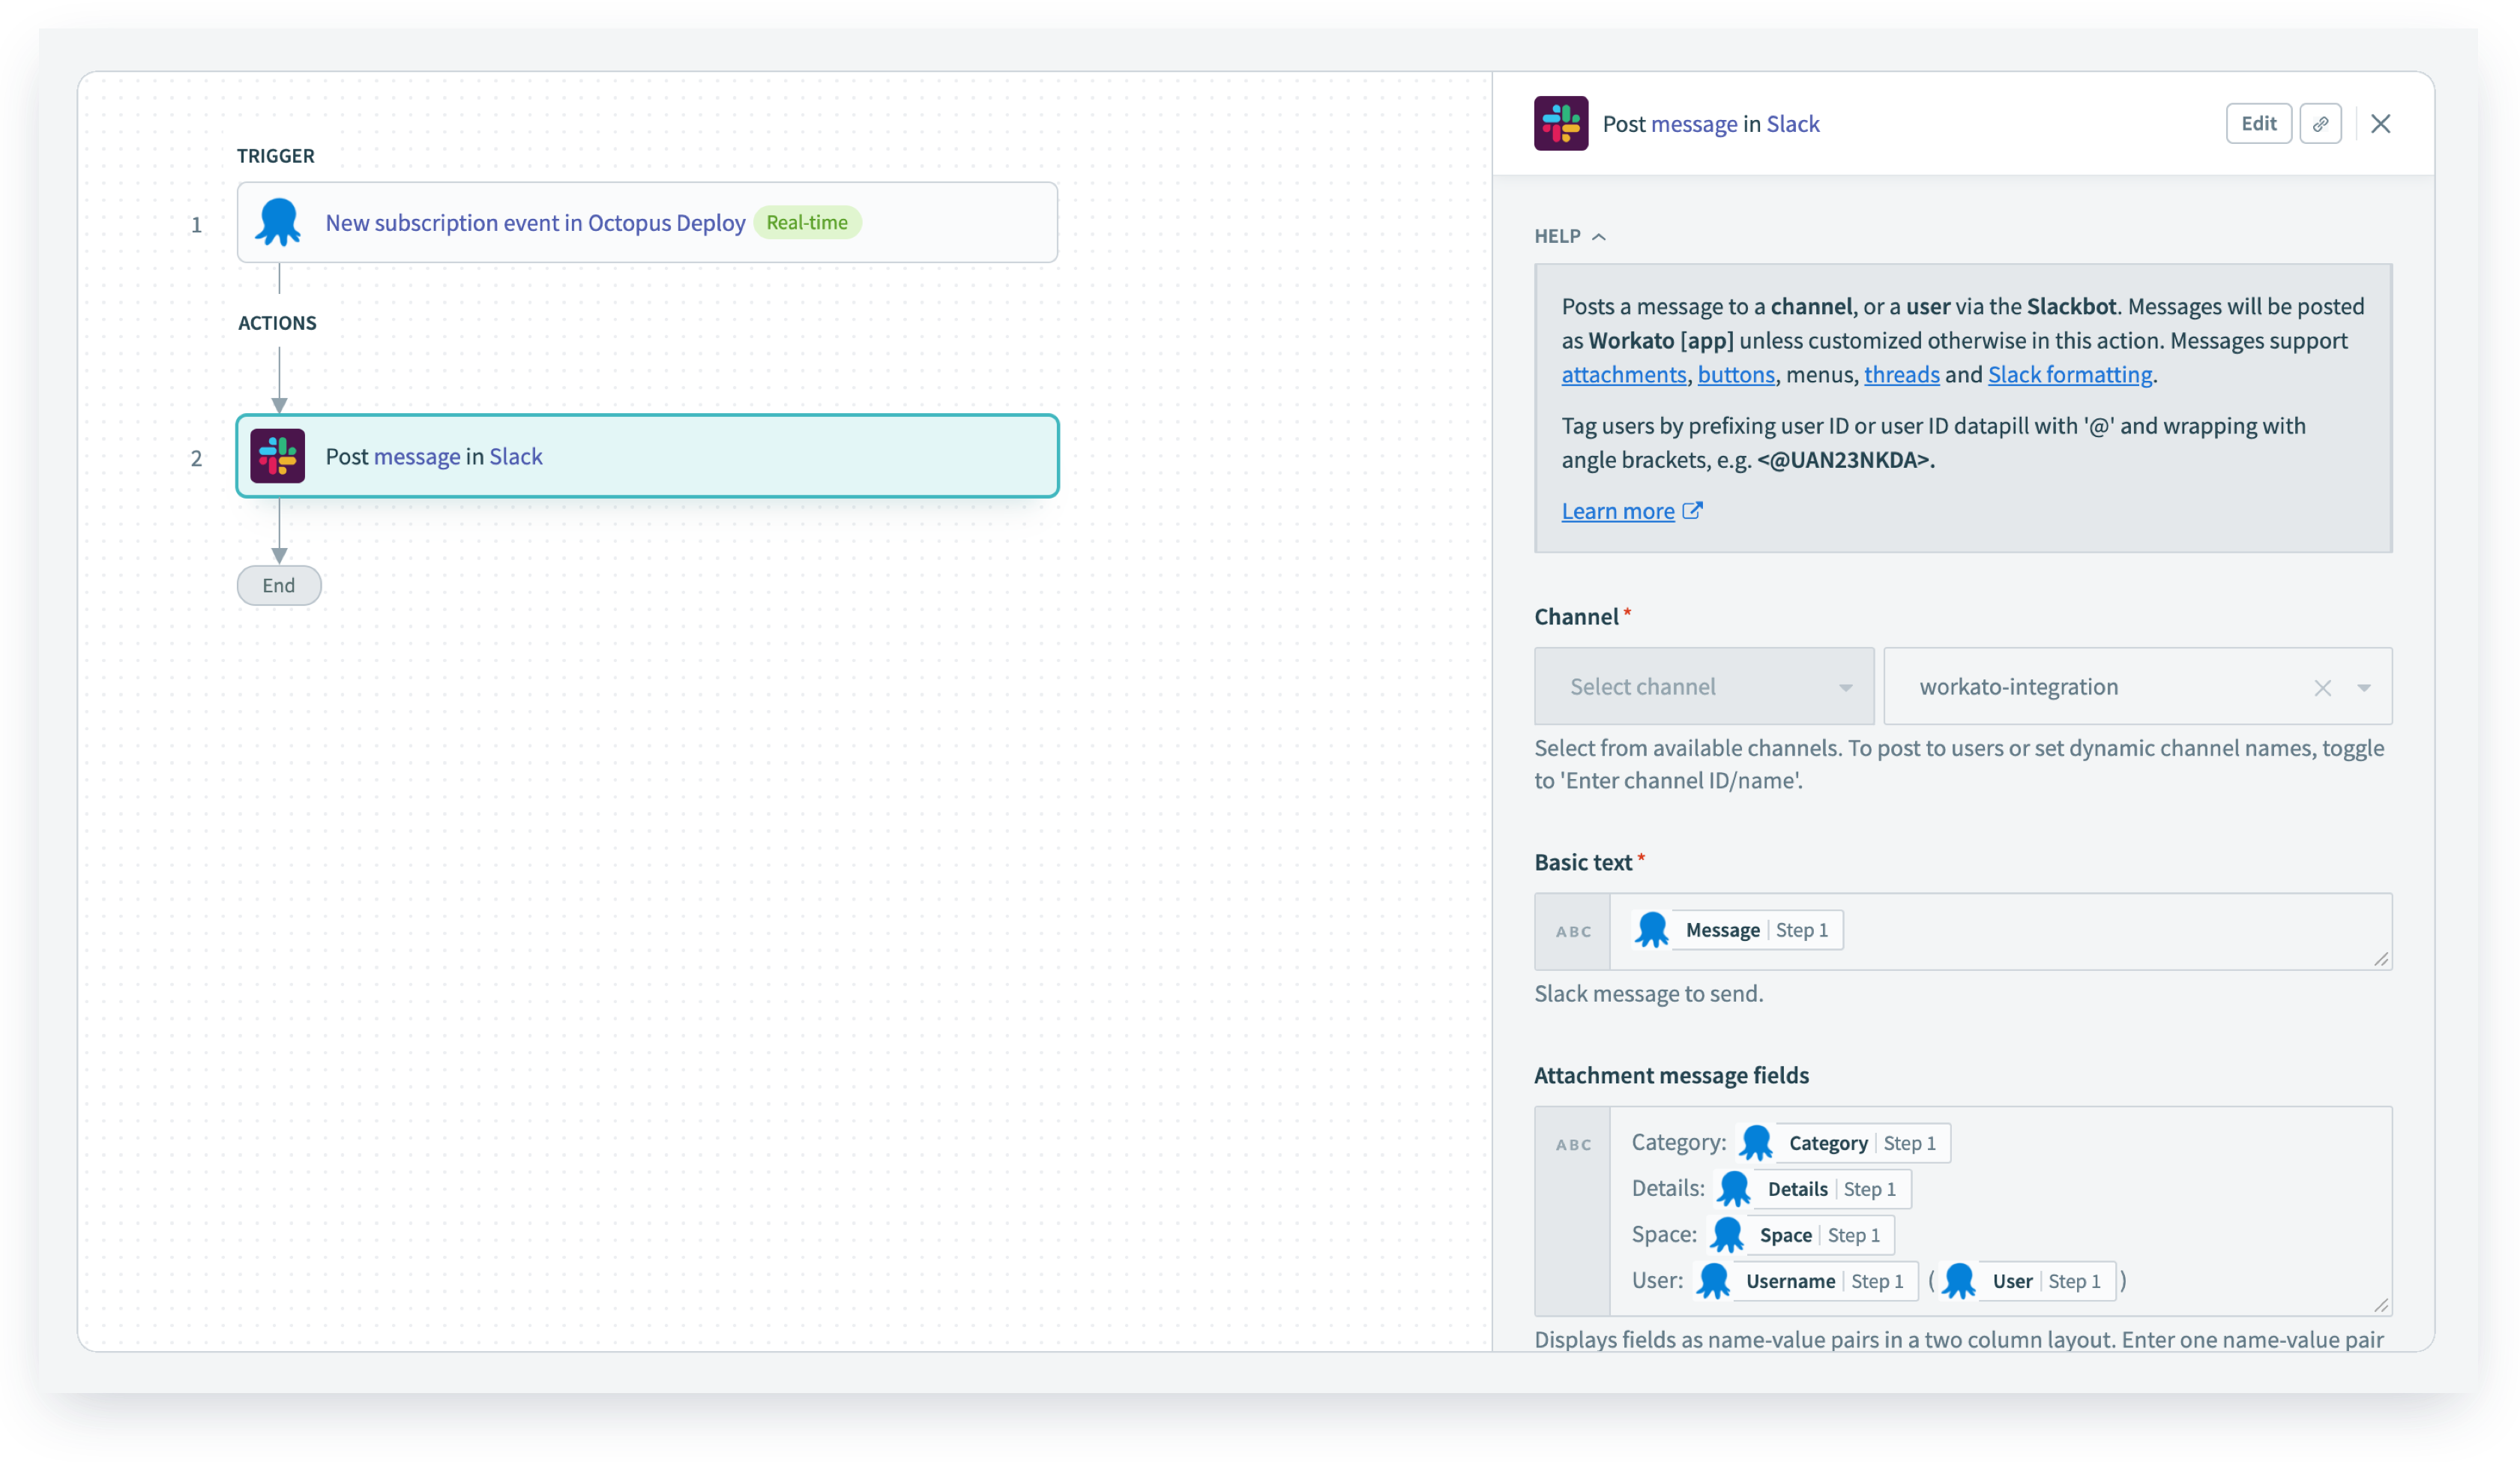 With Workato you can notify a Slack channel when events occur in Octopus